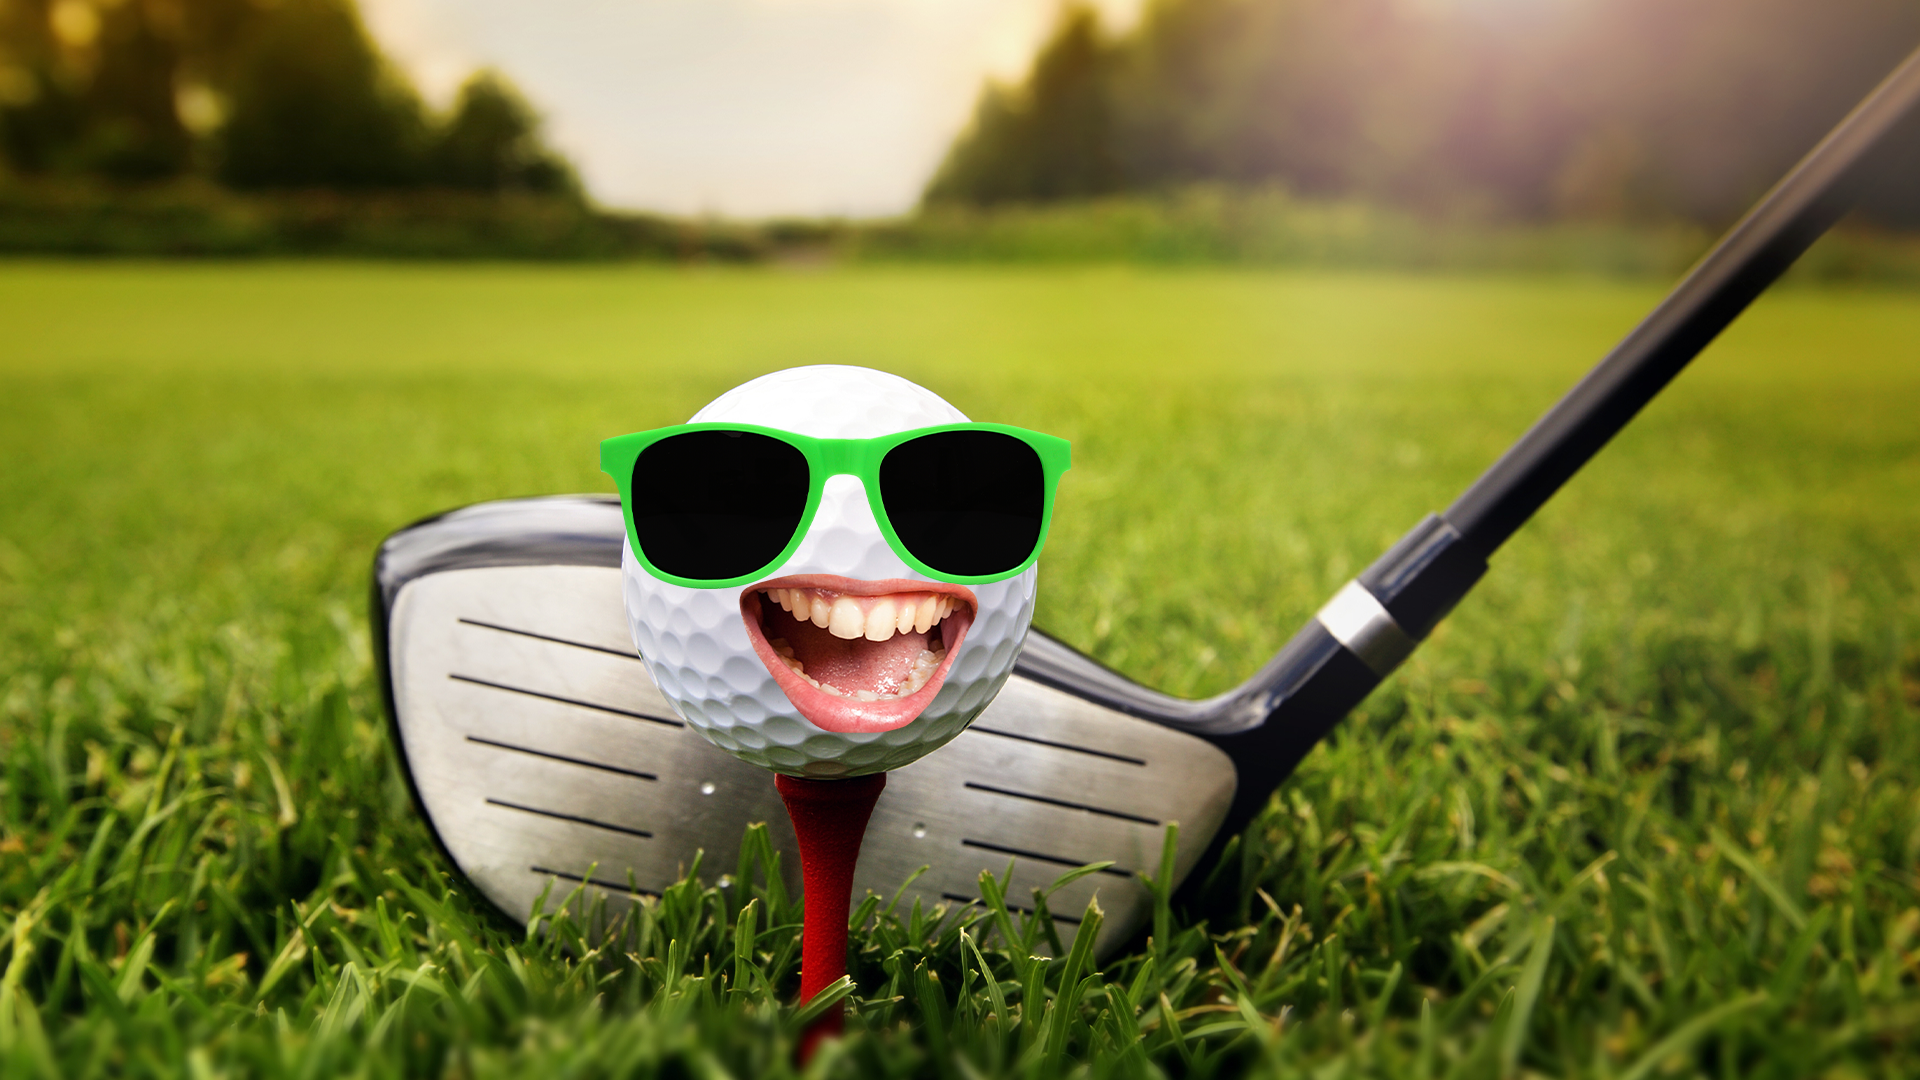 Golf ball with goofy face and club on grass